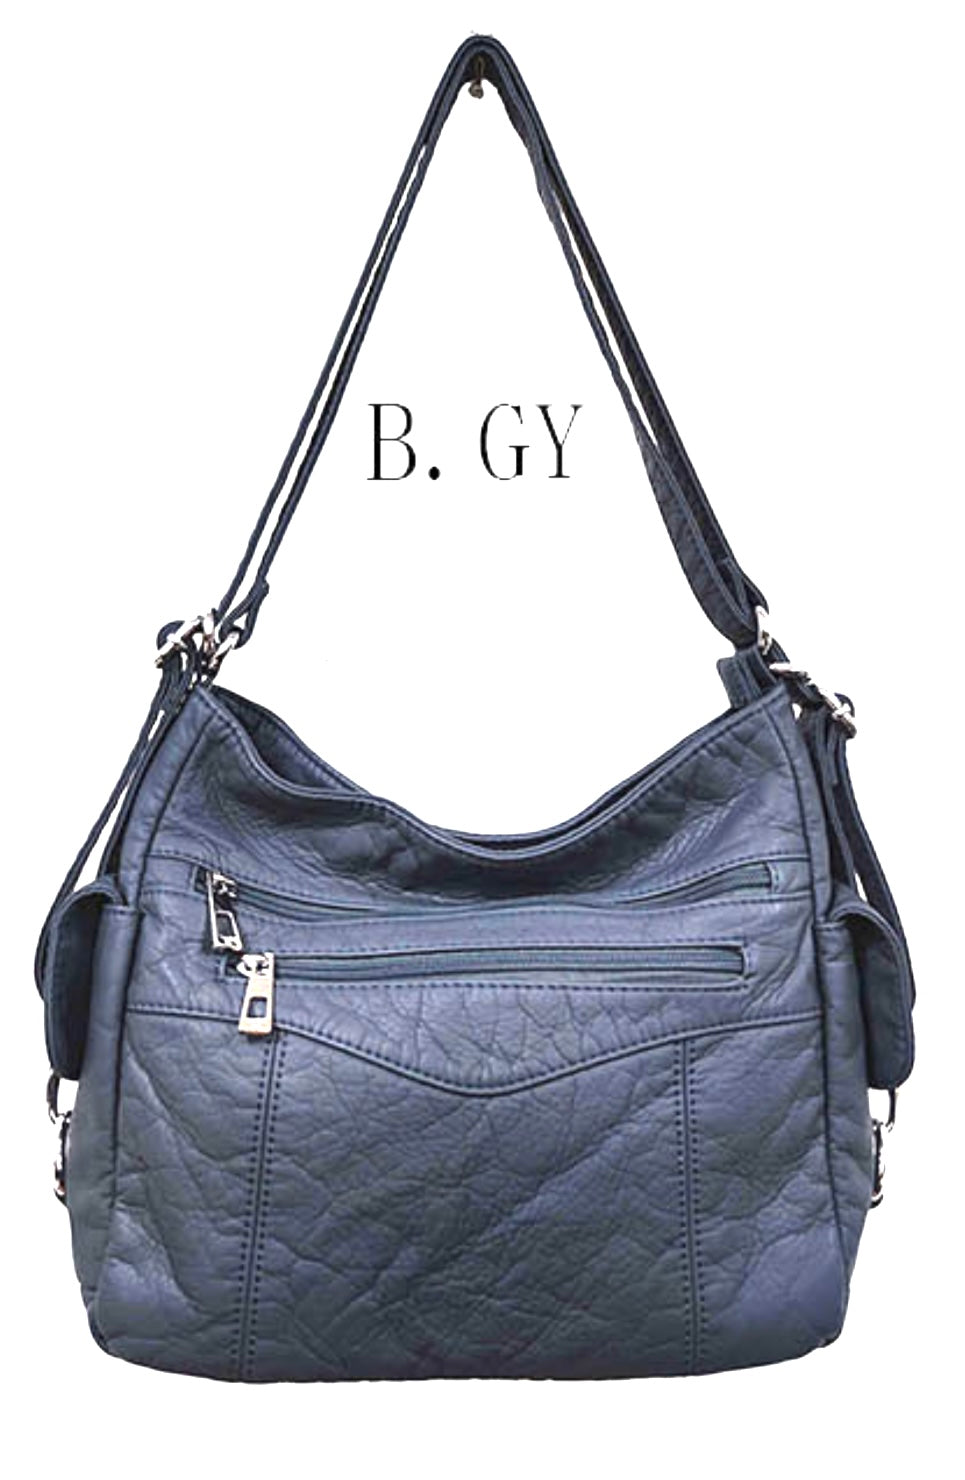 Blue/Grey WH3101 3 in 1 style backpack purse with v front